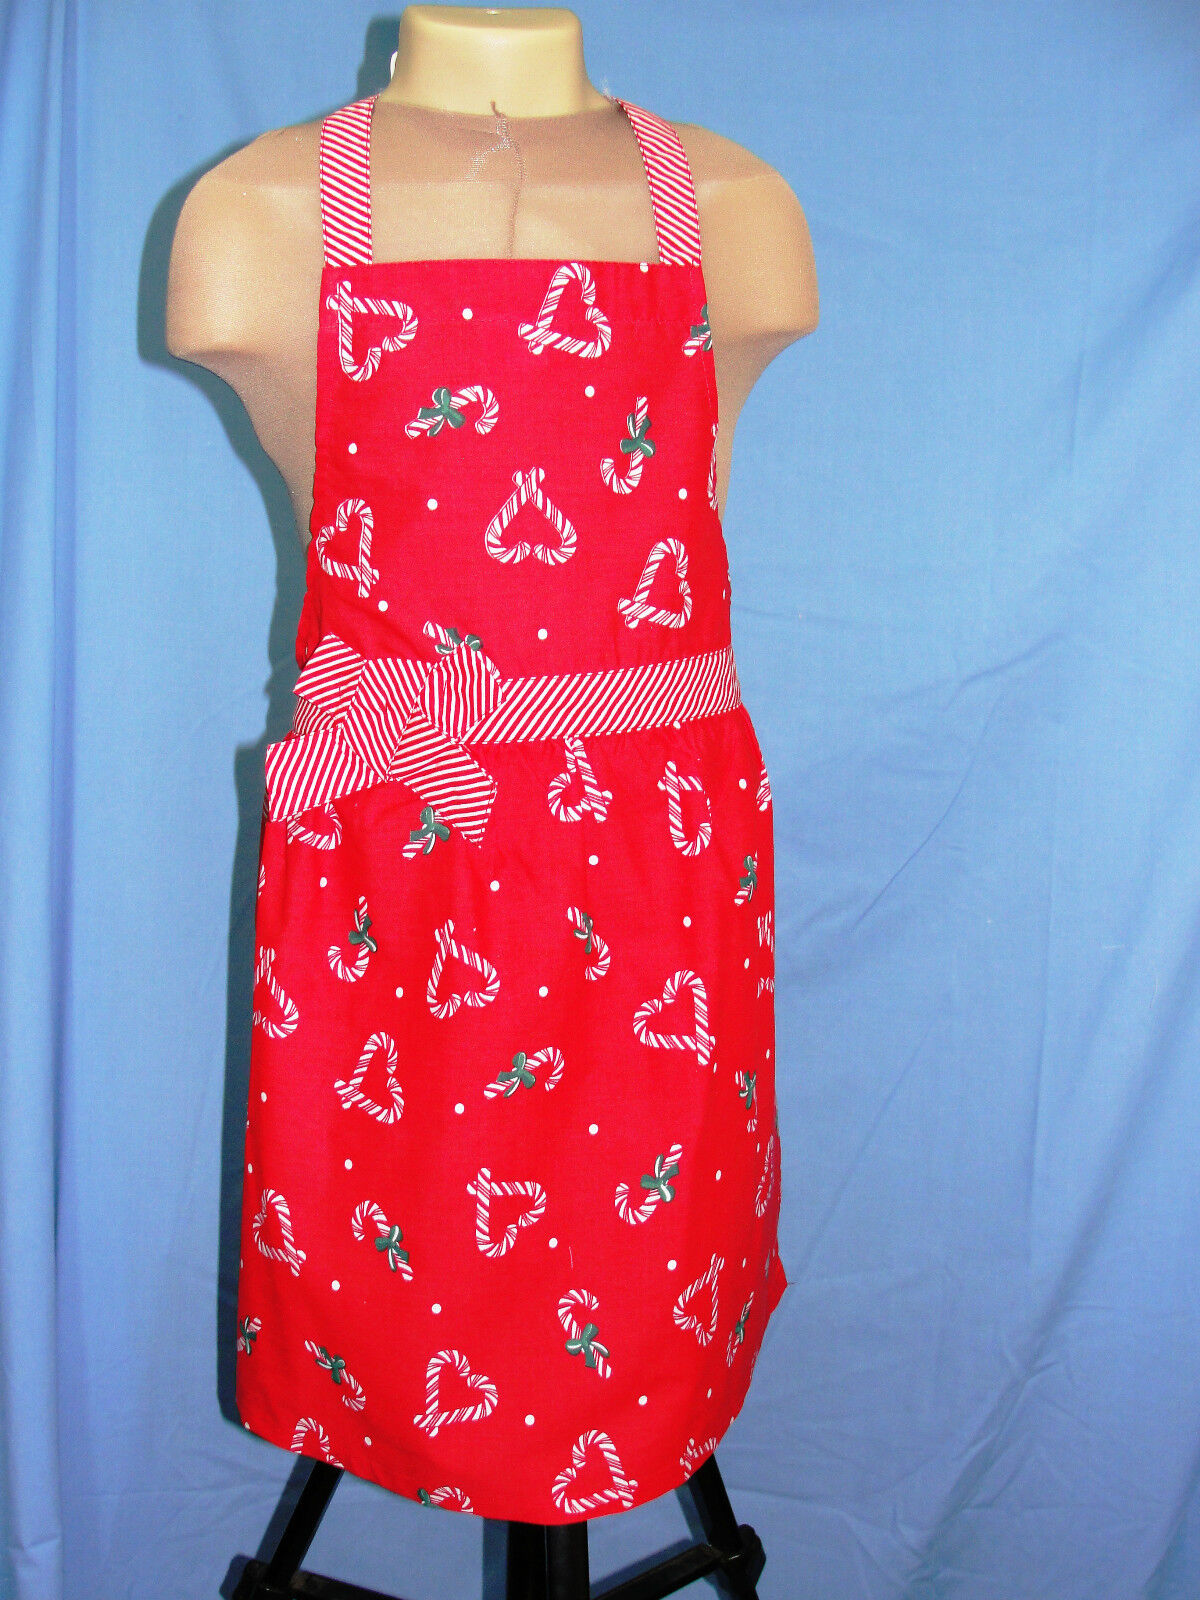 New Child's Red Christmas Apron w/Candy Canes & Hearts from Avon